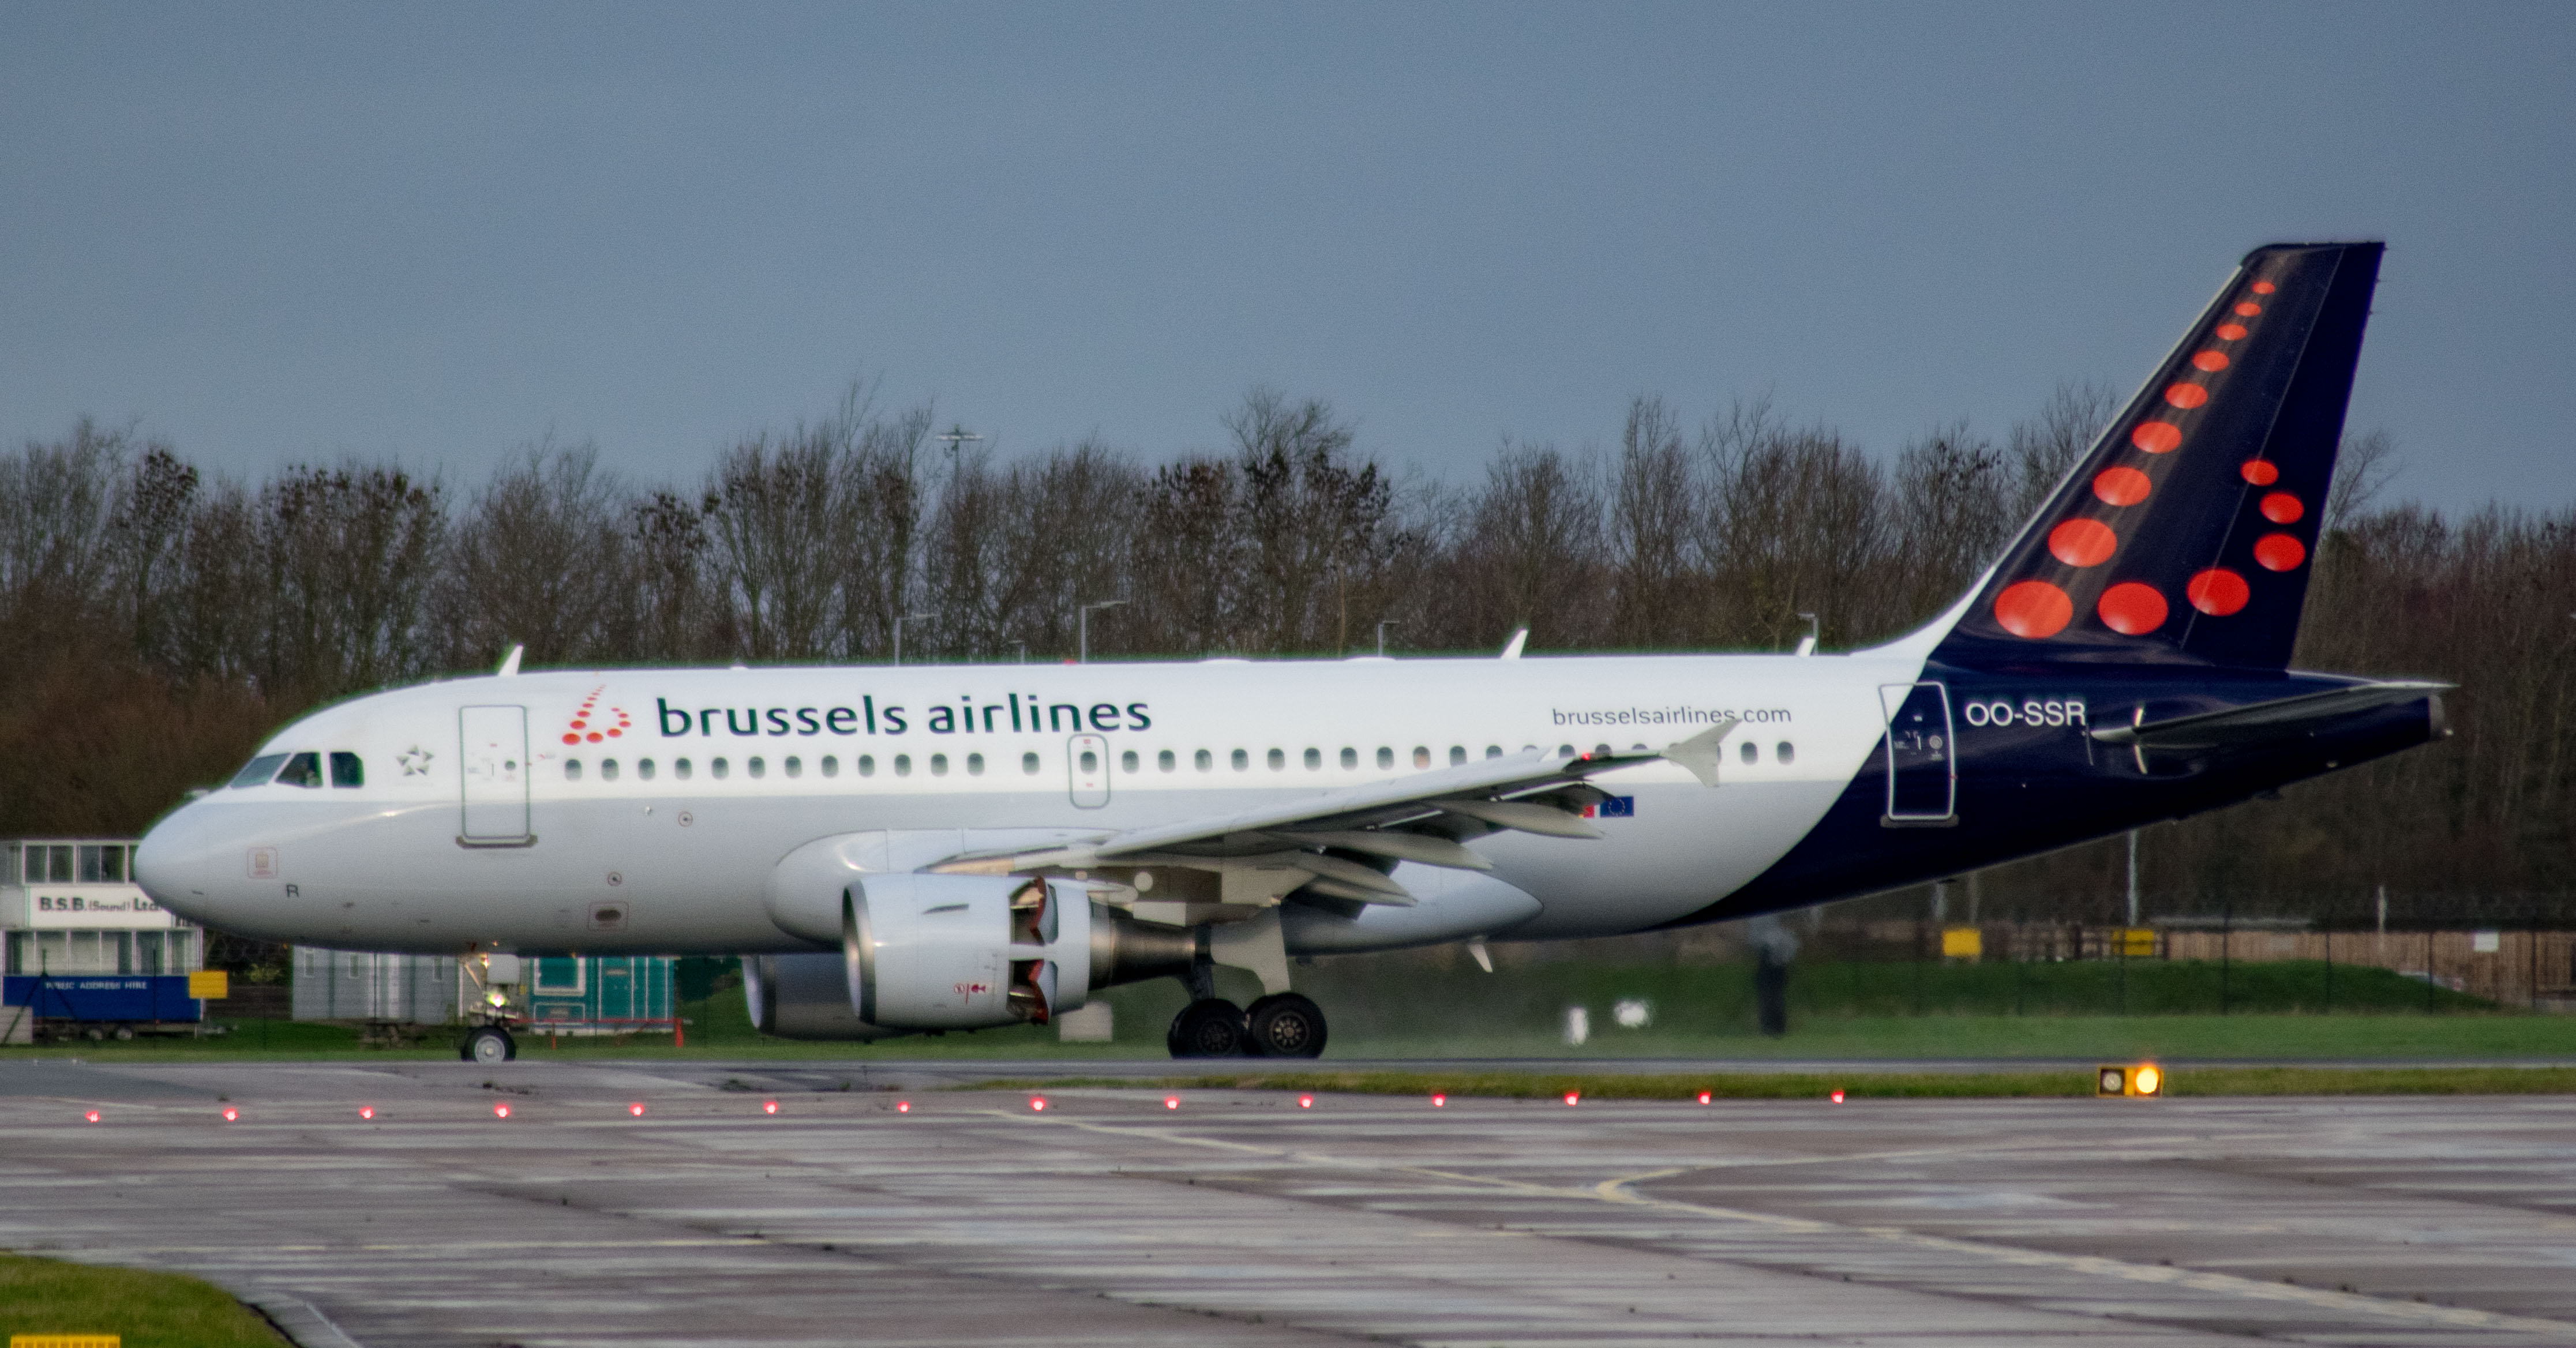 OO-SSR/OOSSR Brussels Airlines Airbus A319-112 Photo by AV8 Photos - AVSpotters.com